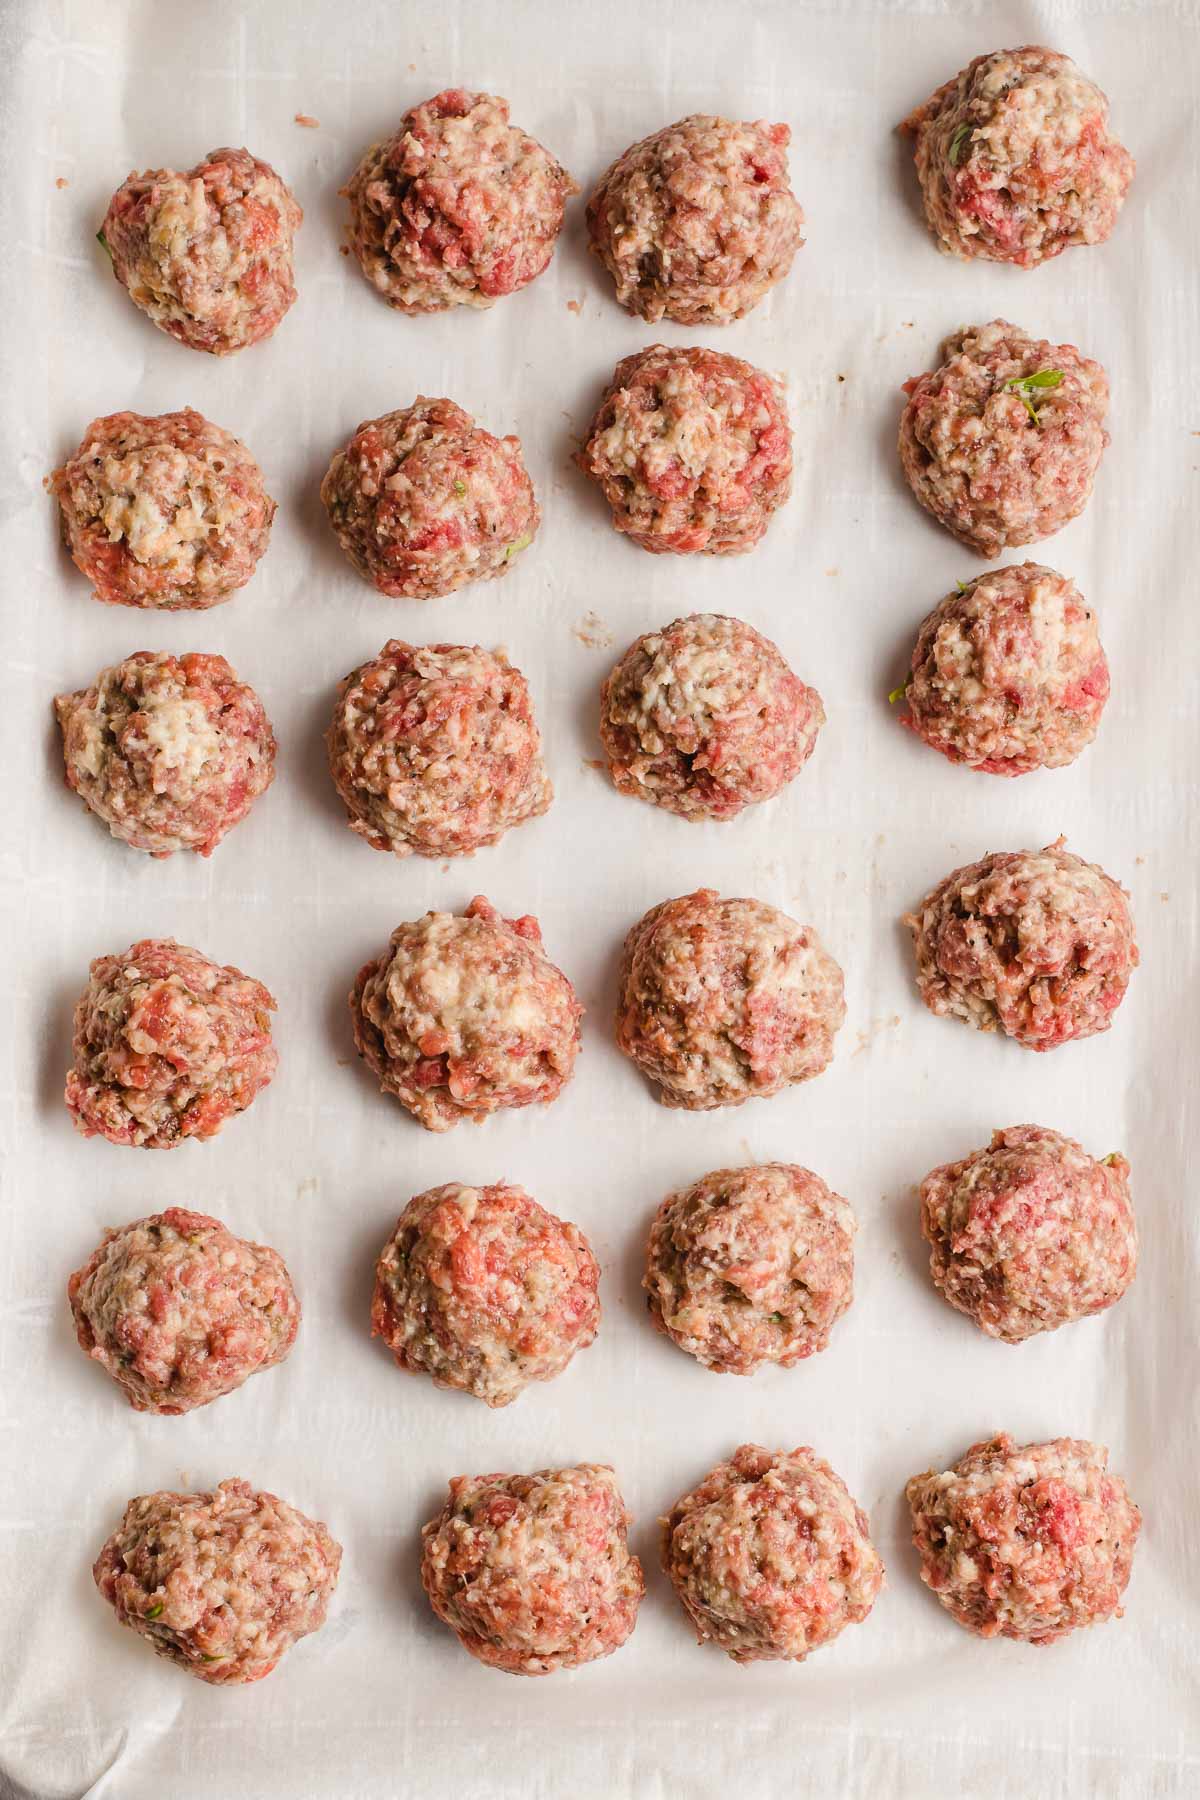 Raw meatballs lined up on parchment paper before baking.